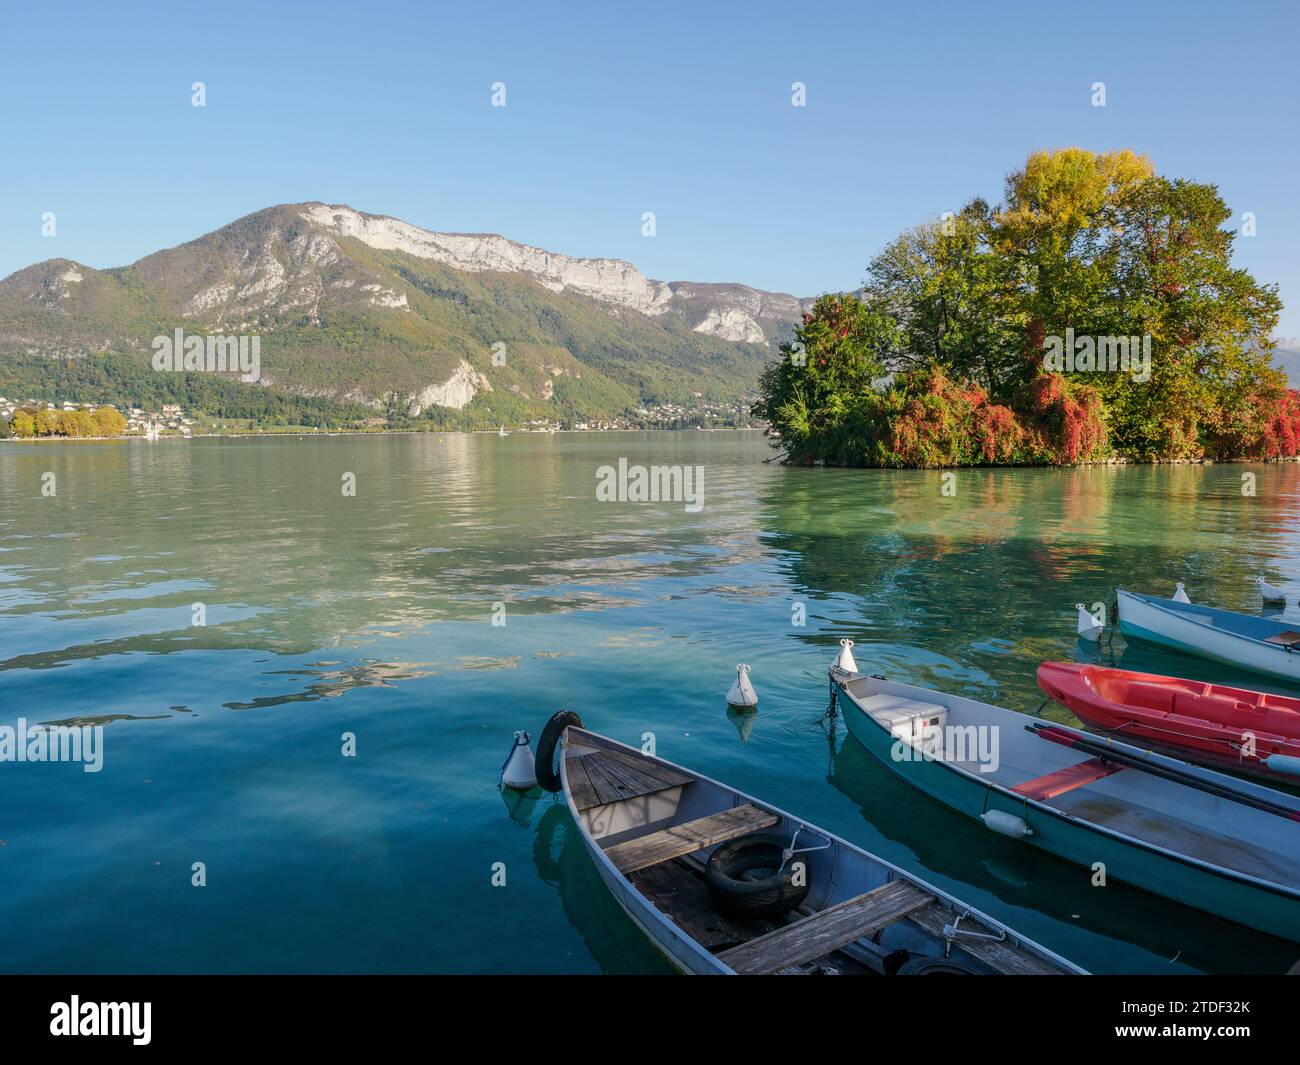 Mountains, small boats, and fall color on Lake Annecy, Annecy, Haute-Savoie, France, Europe Stock Photo